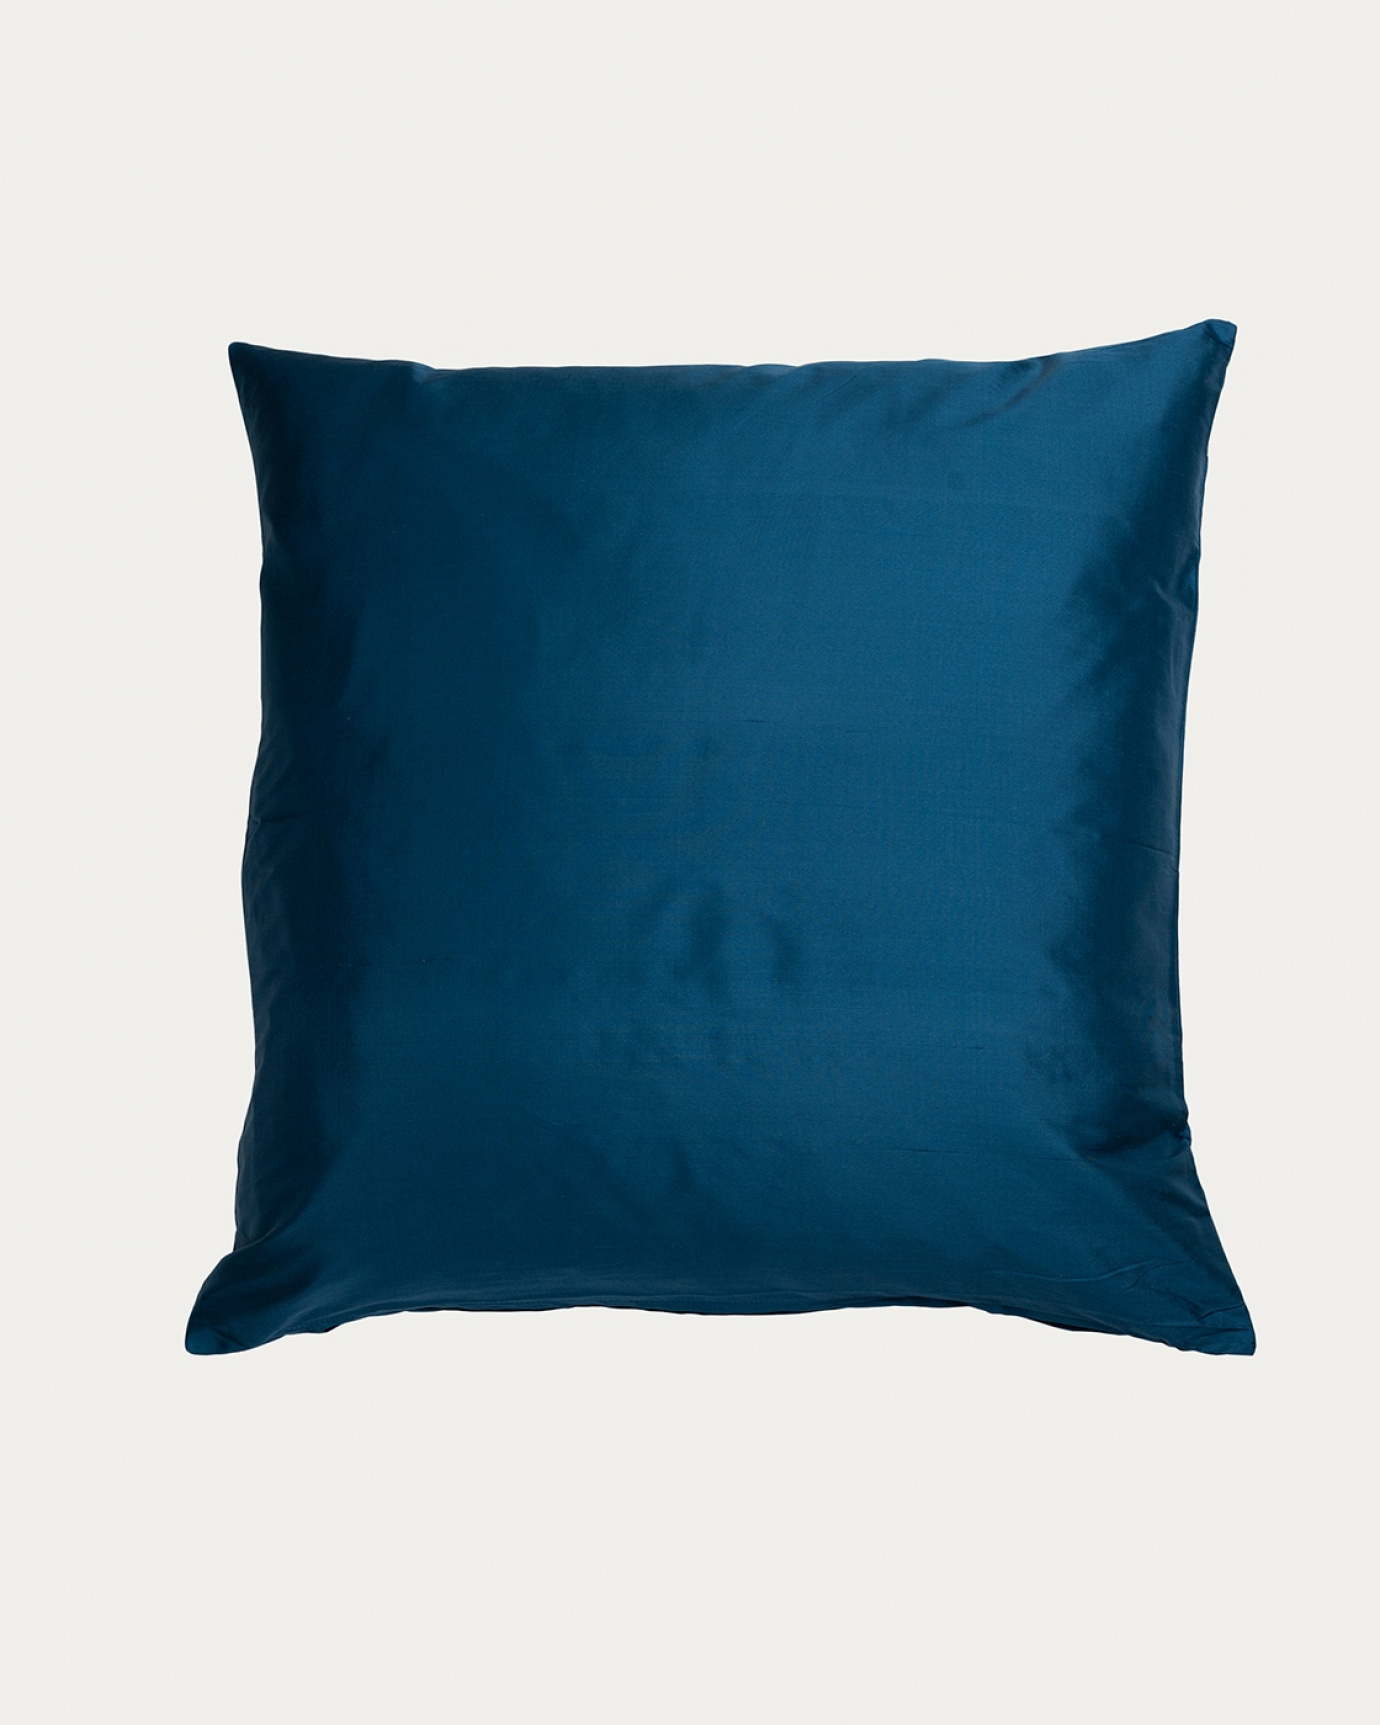 Product image deep sea blue SILK cushion cover made of 100% dupion silk that gives a nice lustre from LINUM DESIGN. Size 50x50 cm.